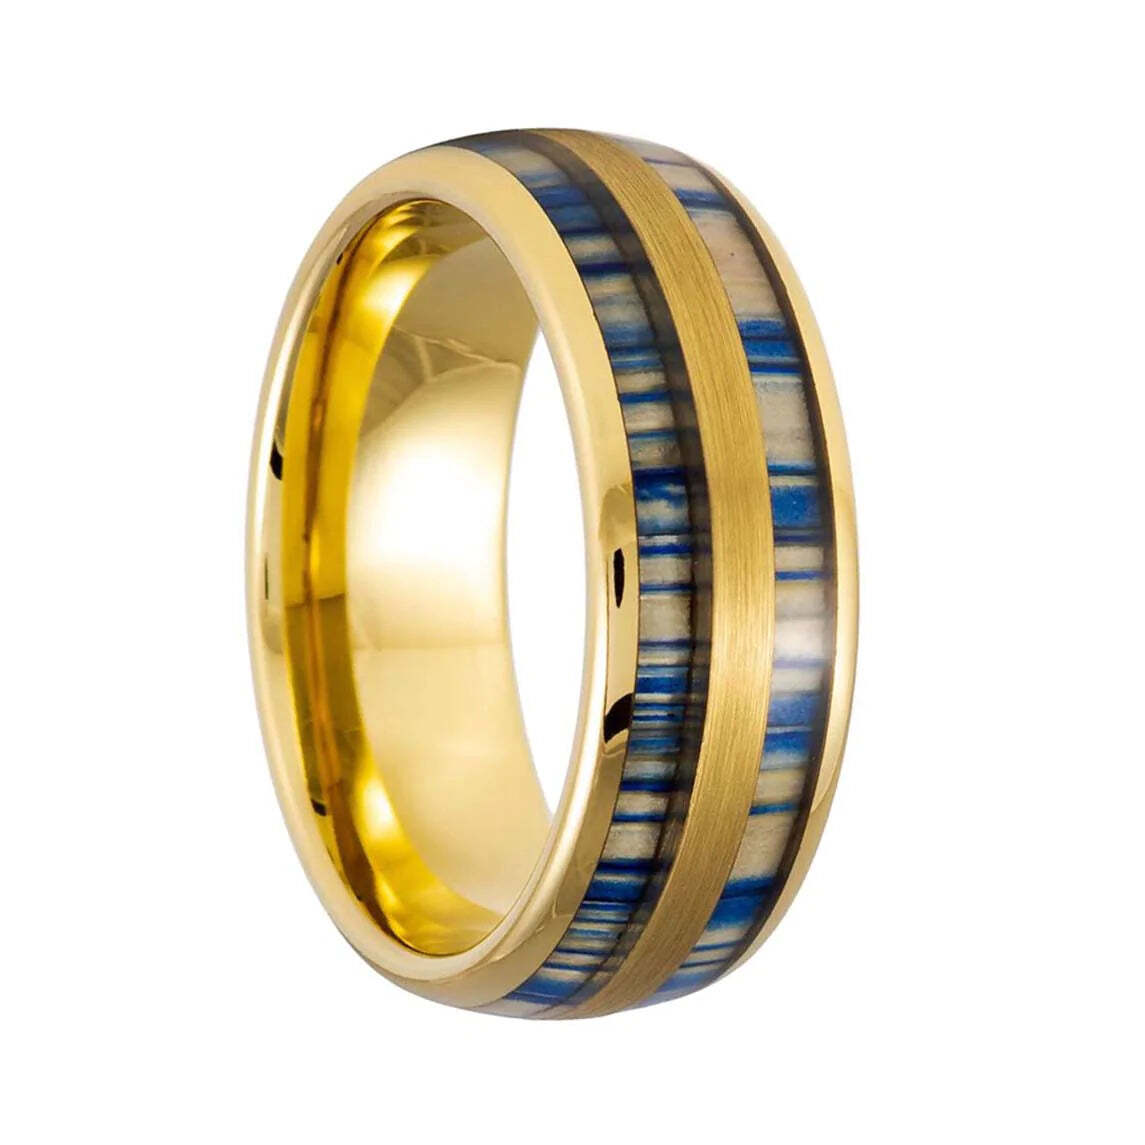 Dyed Bamboo Inlaid Gold Tungsten Men's Wedding Band